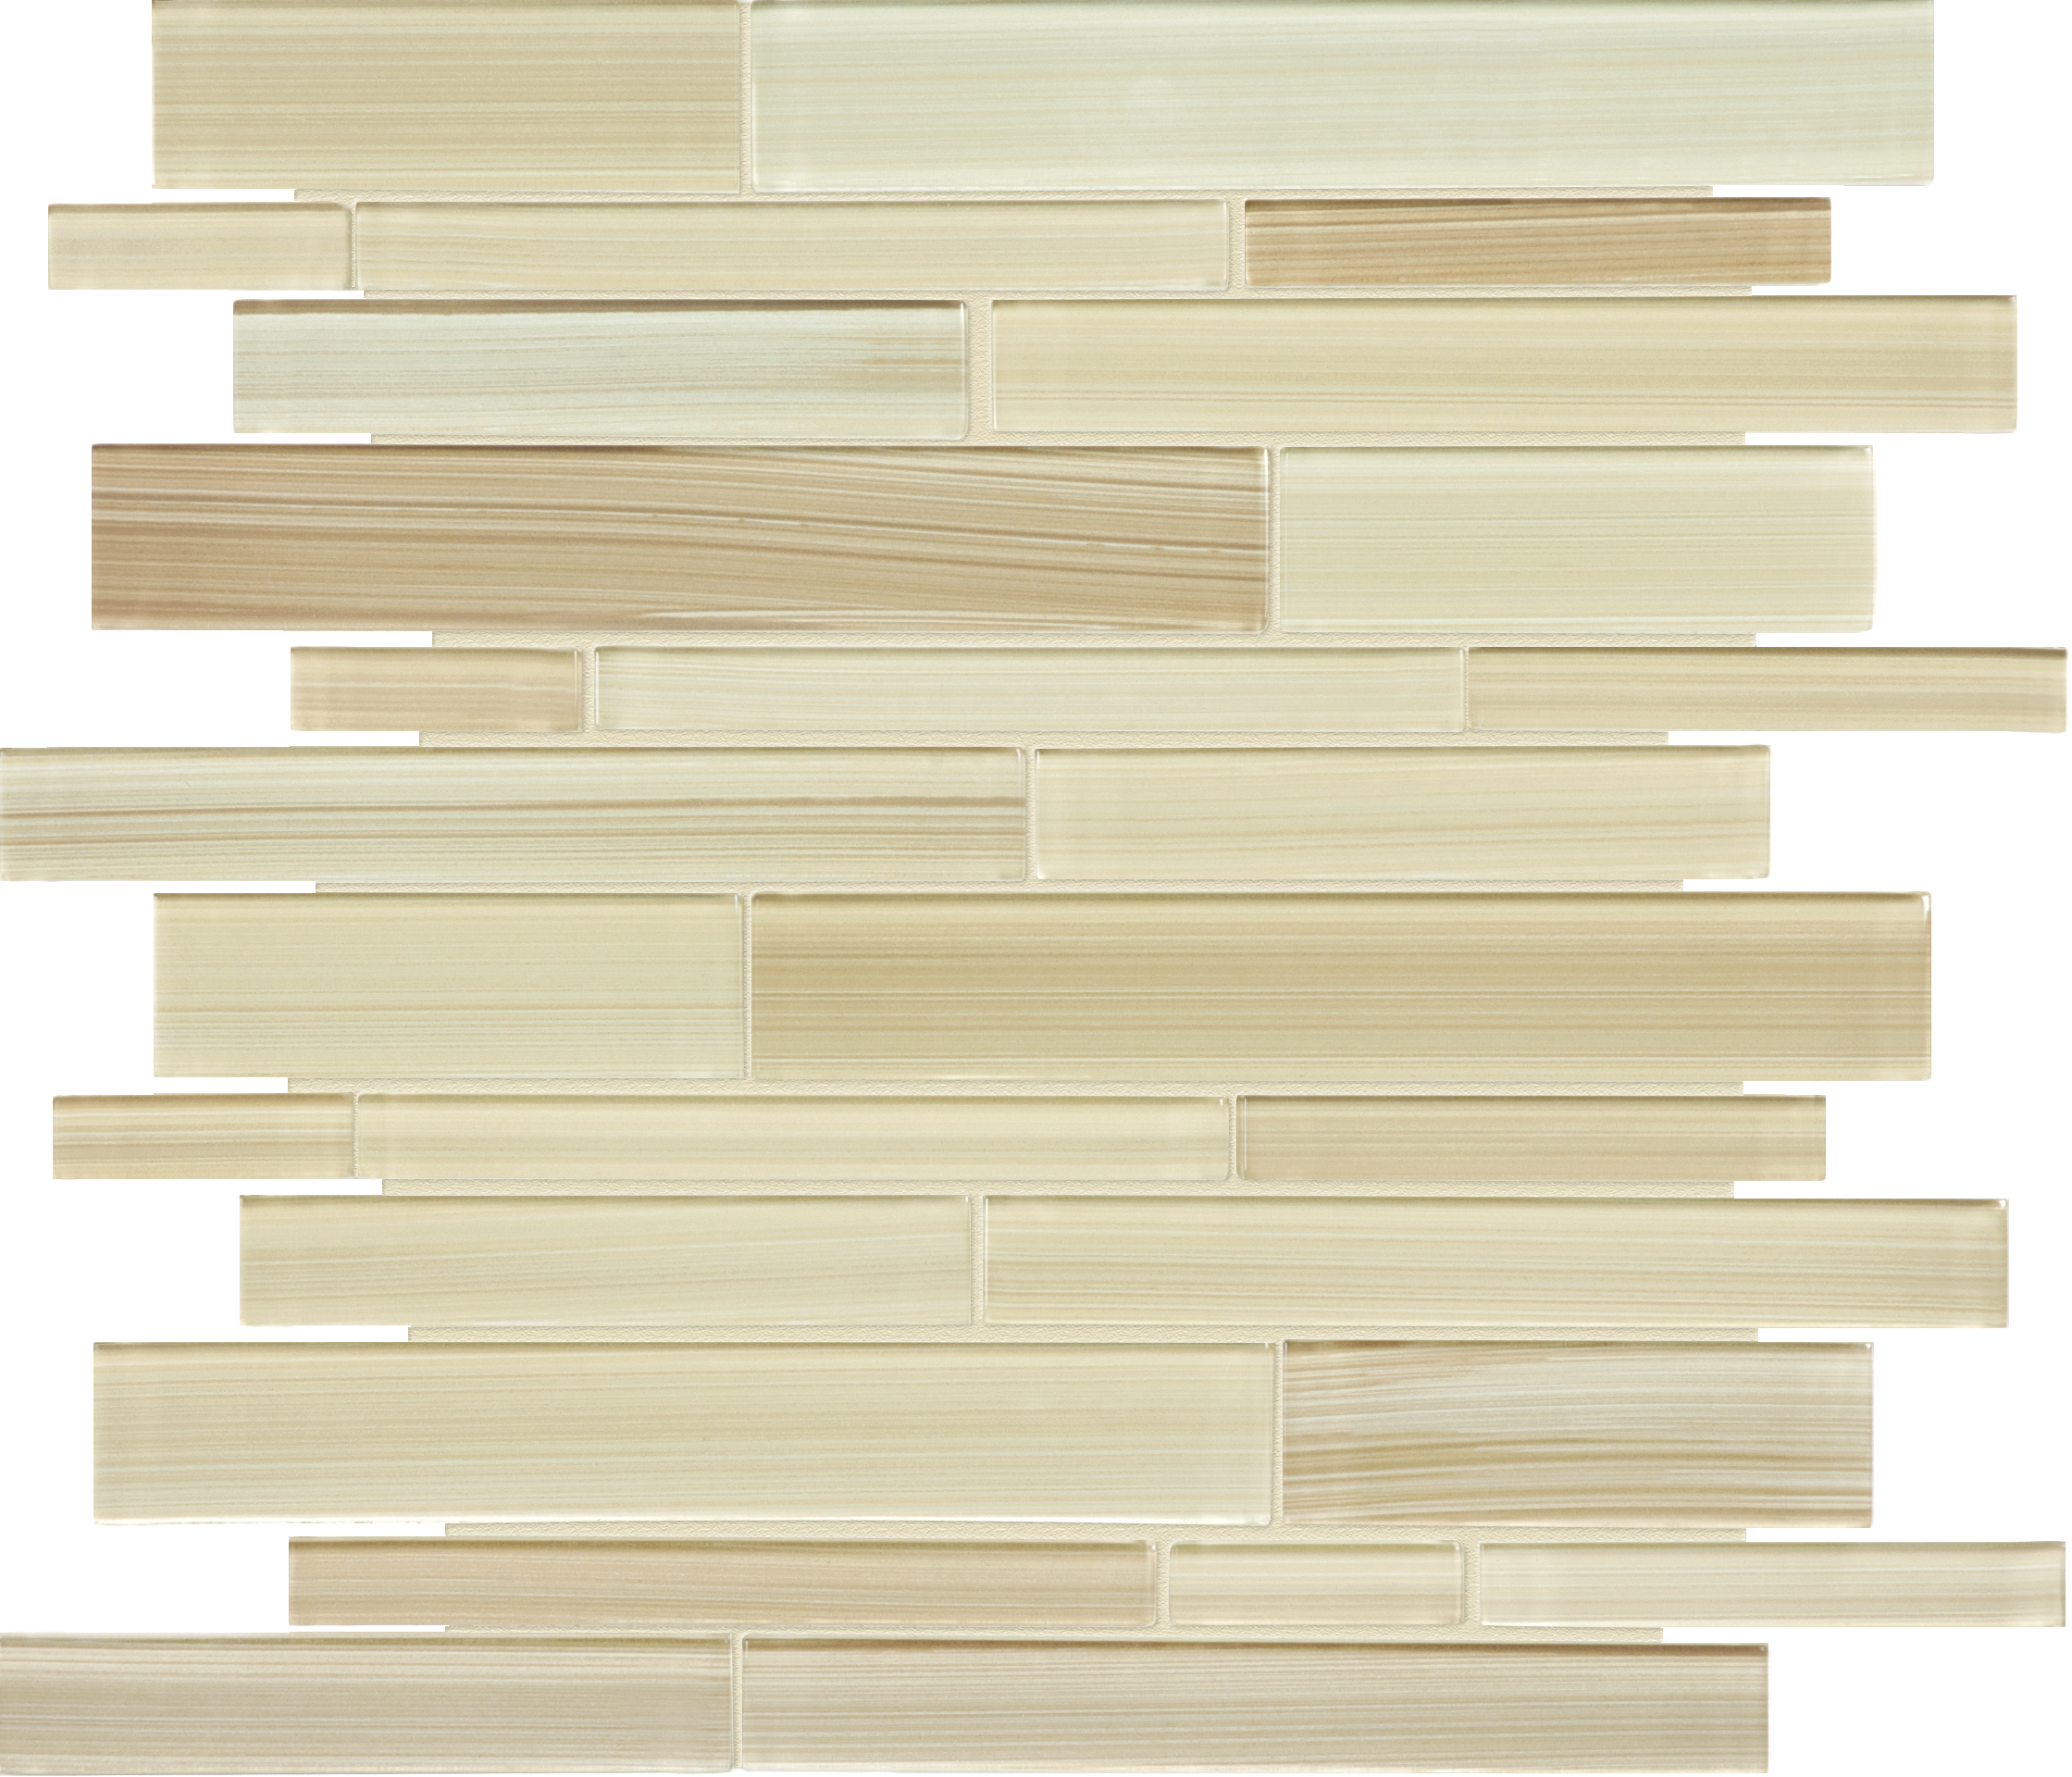 sand random strip pattern fused glass mosaic from fusion anatolia collection distributed by surface group international glossy finish rounded edge mesh shape